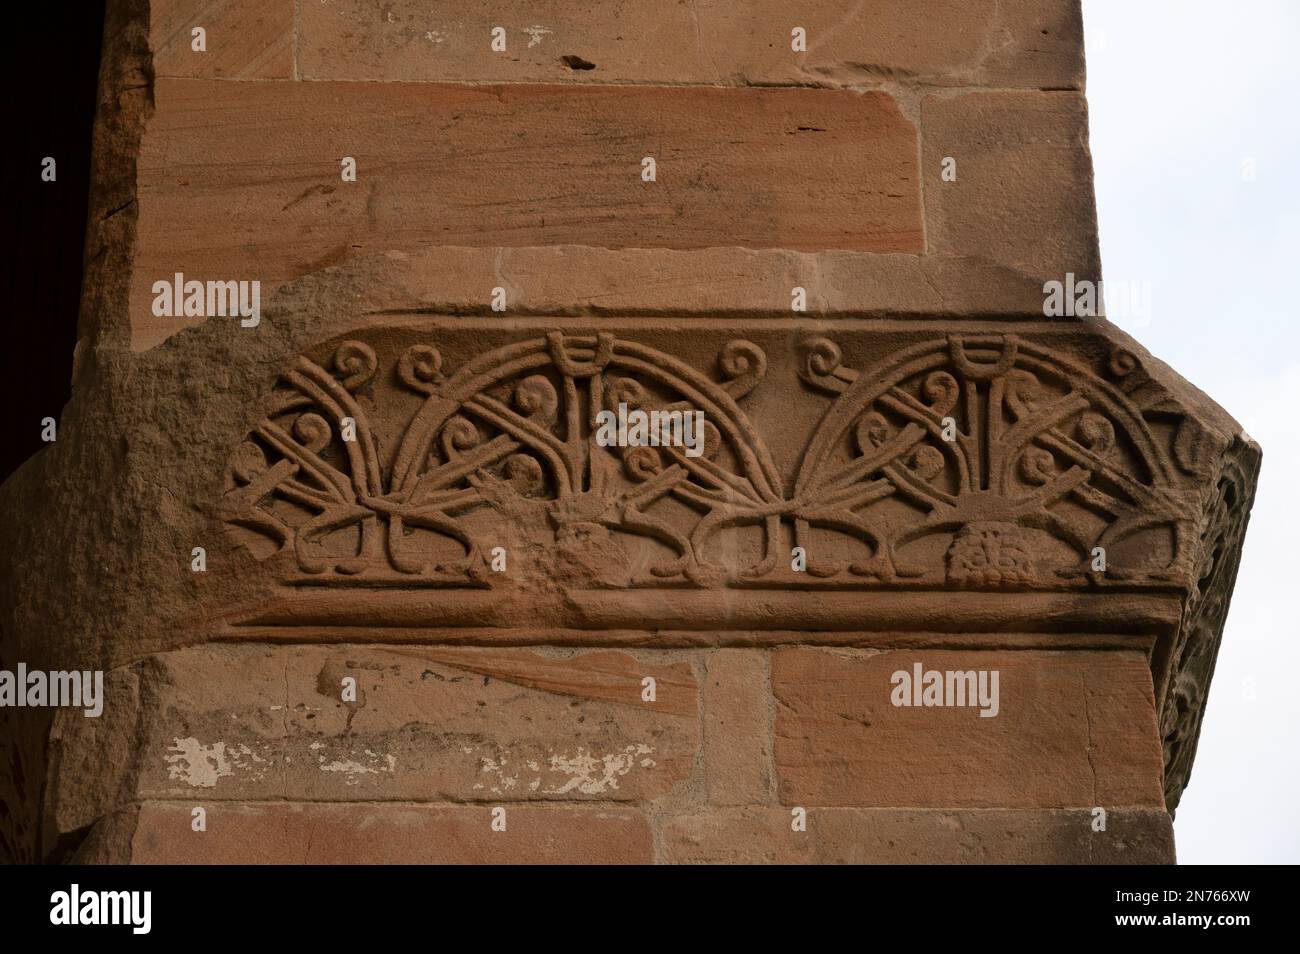 Germany, Hesse, South Hesse, South Hesse District Bergstrasse, Lorsch, World Heritage Site Lorsch Monastery, facade, old, ornaments, close-up, detail Stock Photo